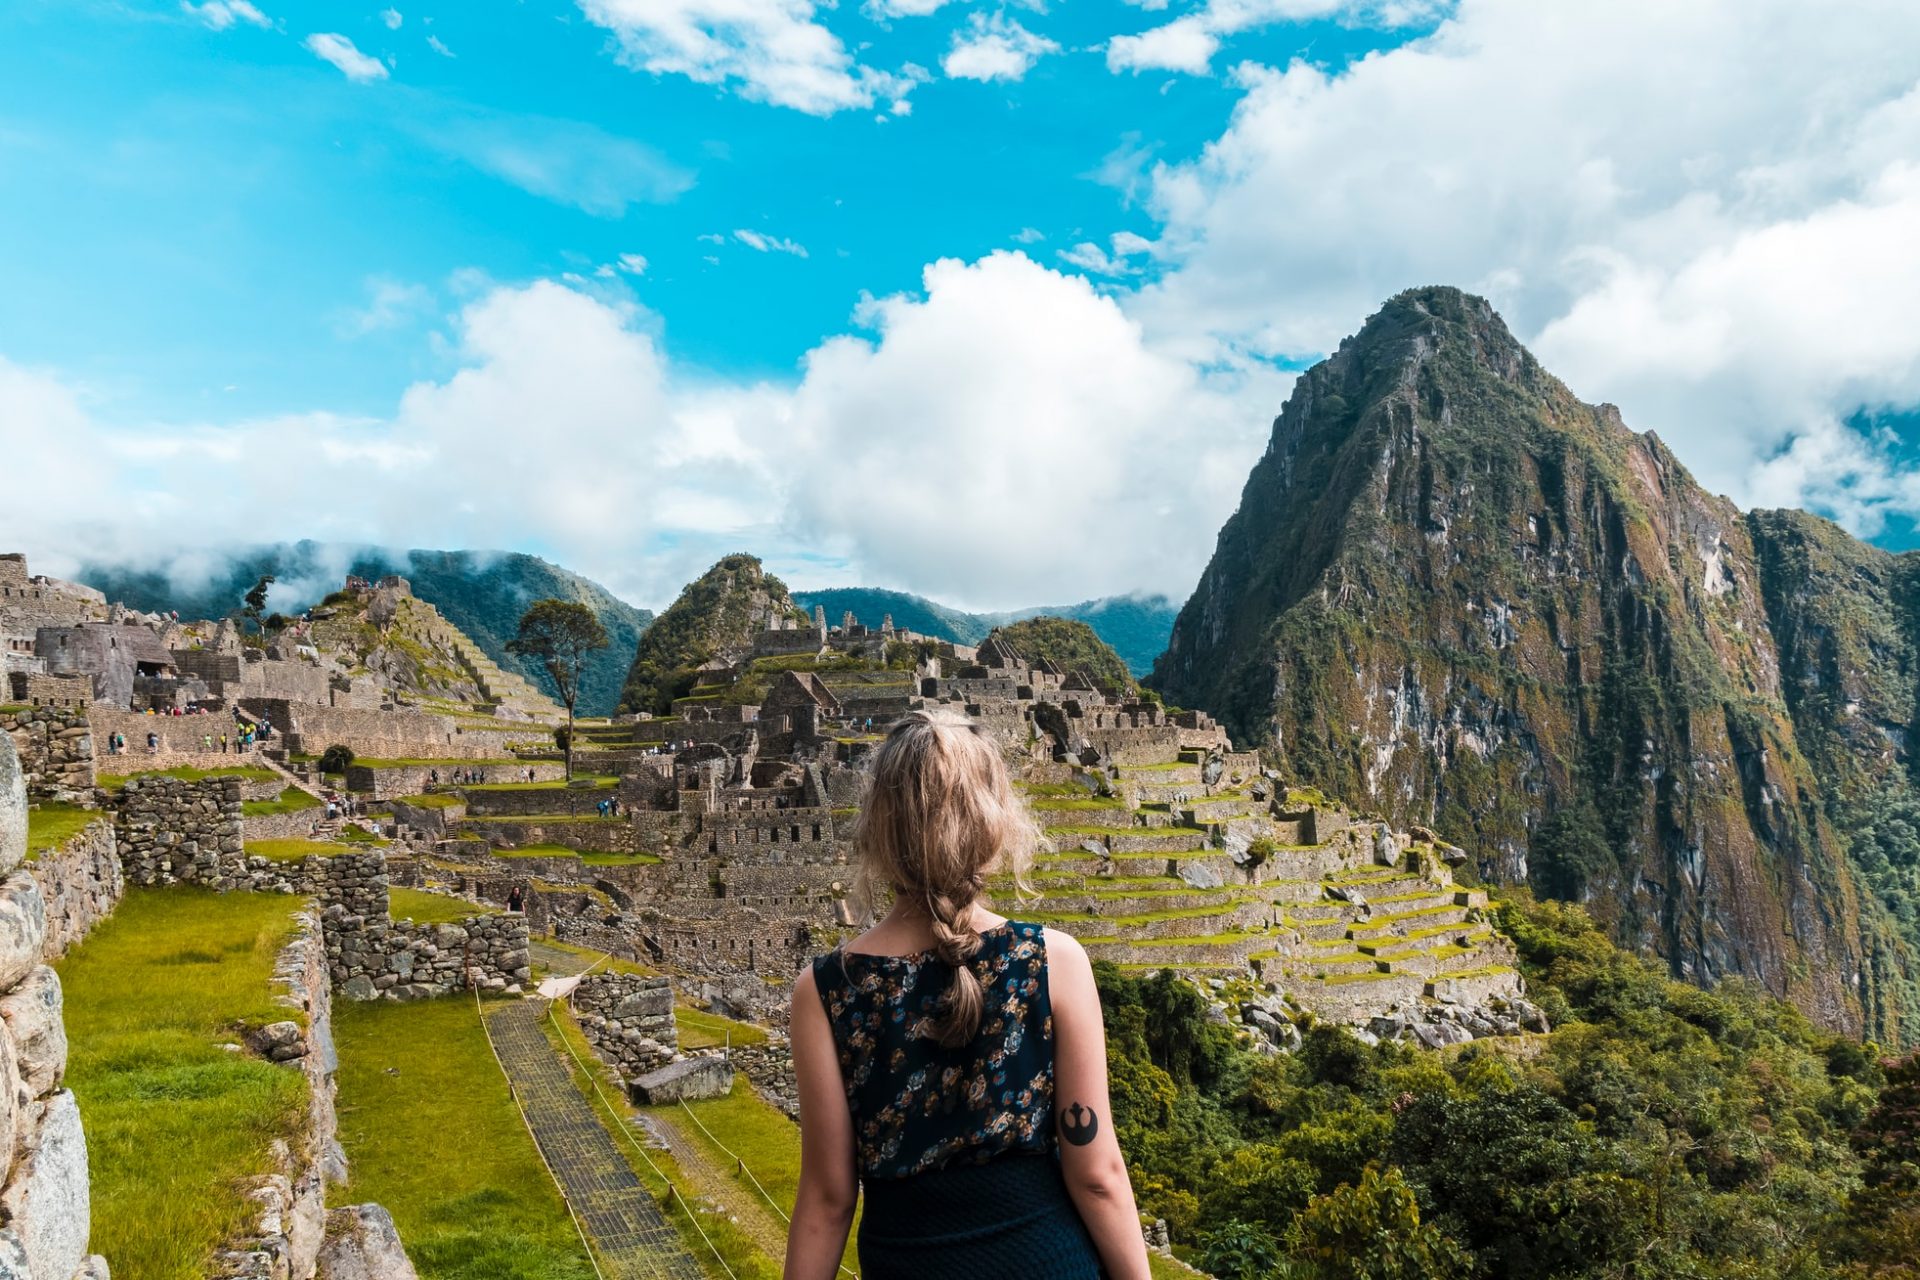 <p>A top experience that consists of doing the Classic Inca Trek Trail (4 days and 3 nights) to Machu Picchu. The perfect opportunity to discover one of the 7 wonders of the world.</p> <p>Image: Unsplash - William Justen de Vasconcellos</p>